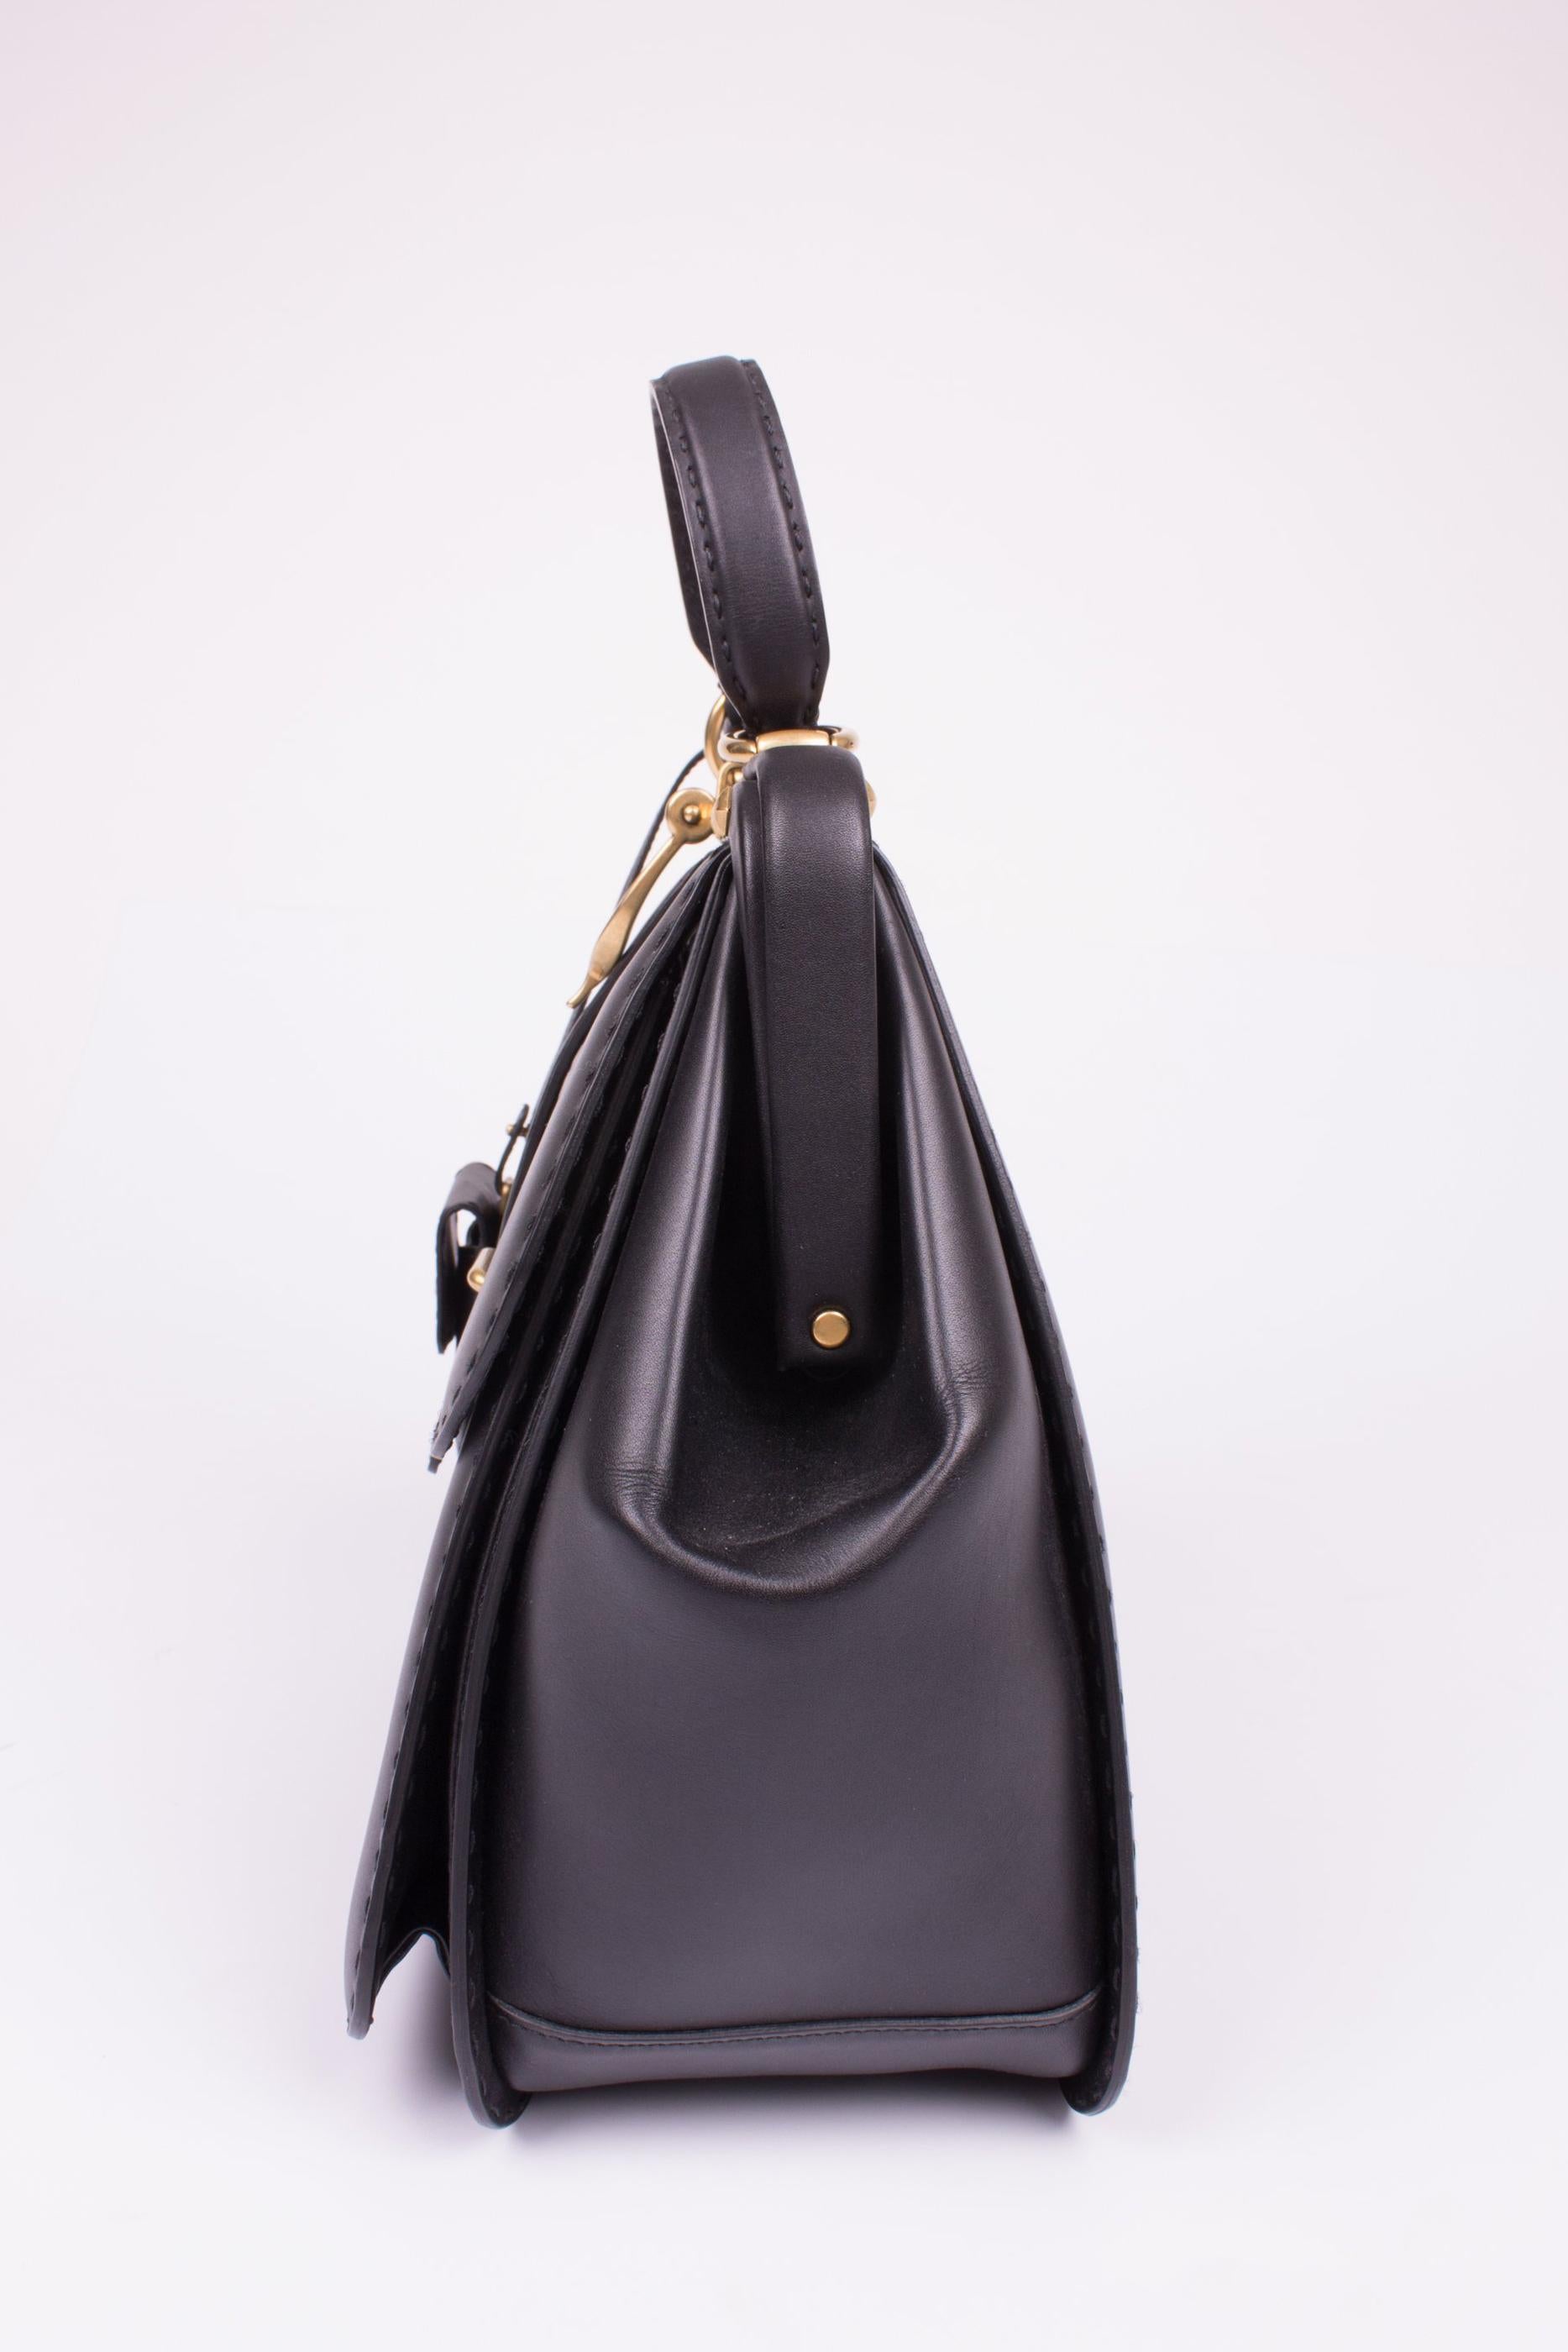 This is a very rare piece; number 146 out of 224 made. It is the Gucci Lady Stirrup Top Handle Bag!

The Gucci Lady Stirrup is often seen, but that's is the 'baguette' shape. This black bag has a little bit more length than the baguette. Executed in